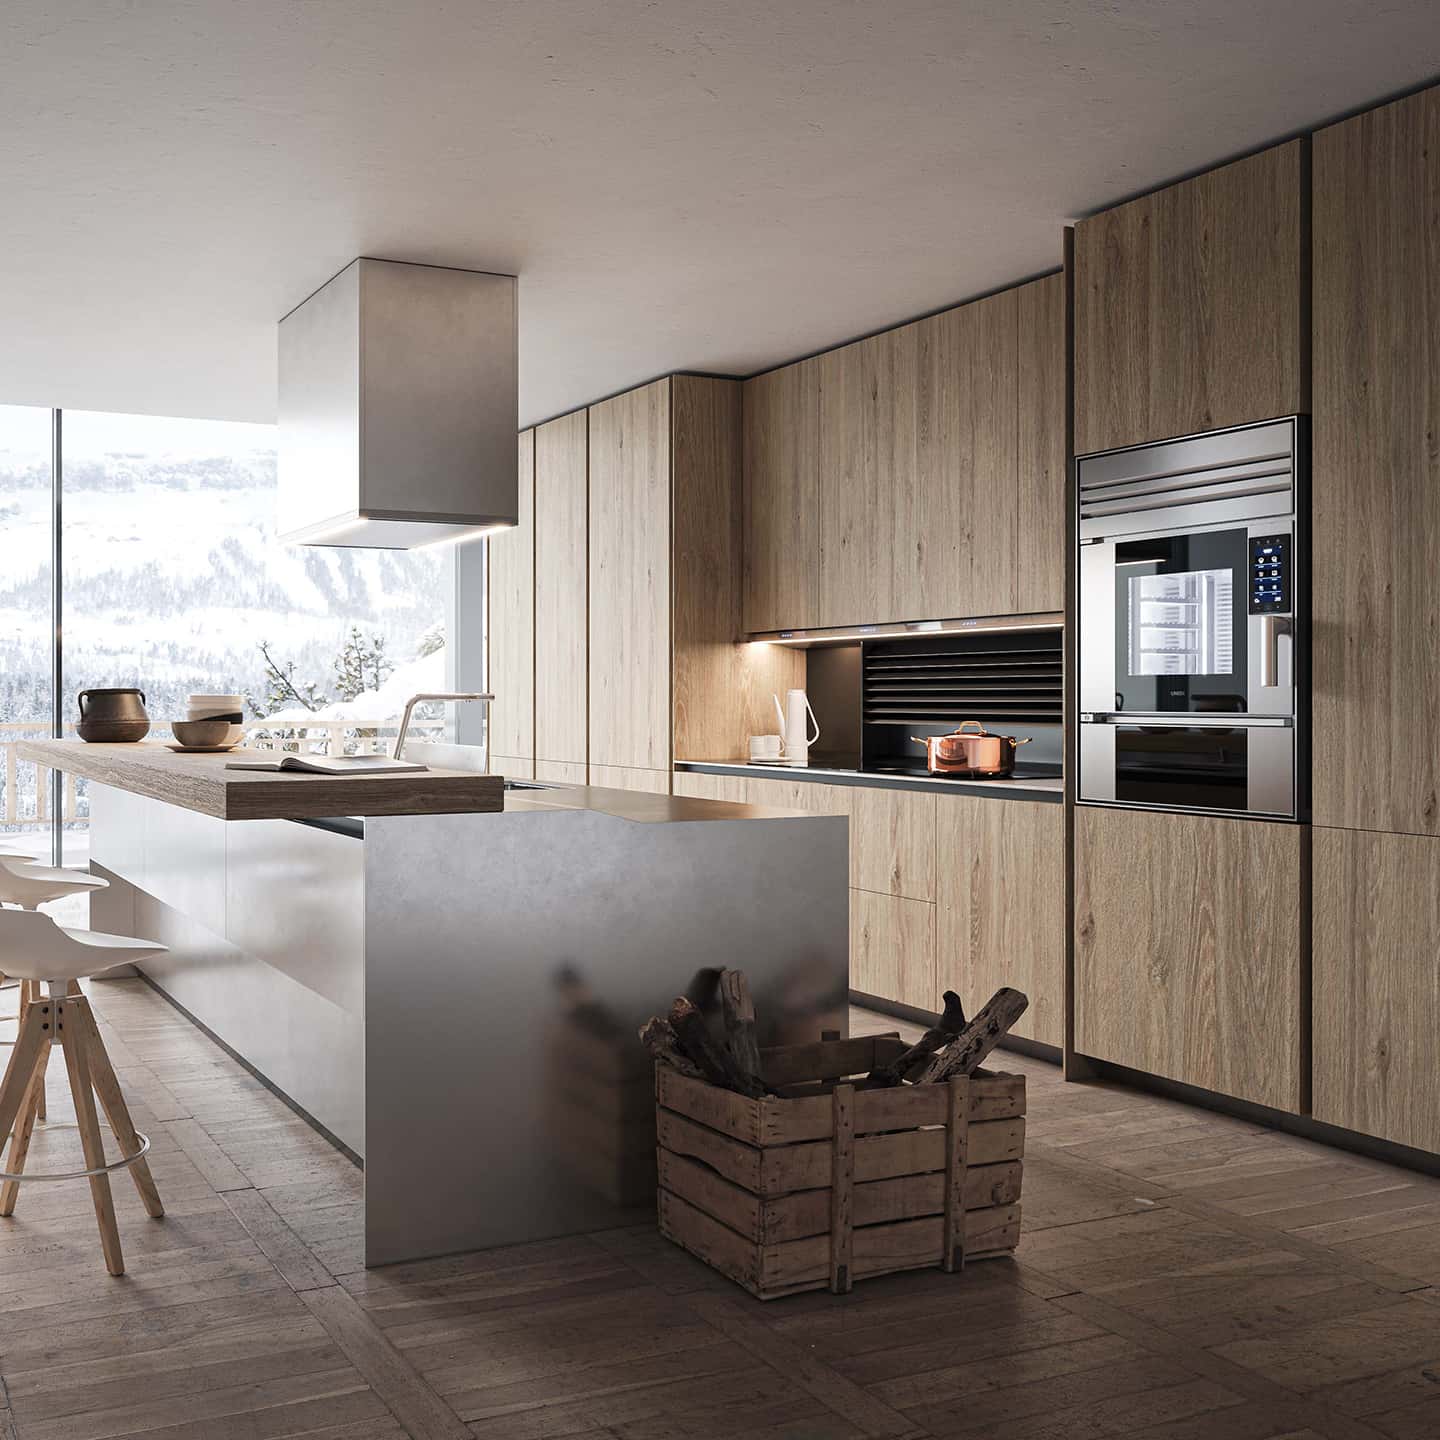 Unox Casa's built-in oven in a luxury kitchen of a mountain chalet in Cortina D'Ampezzo